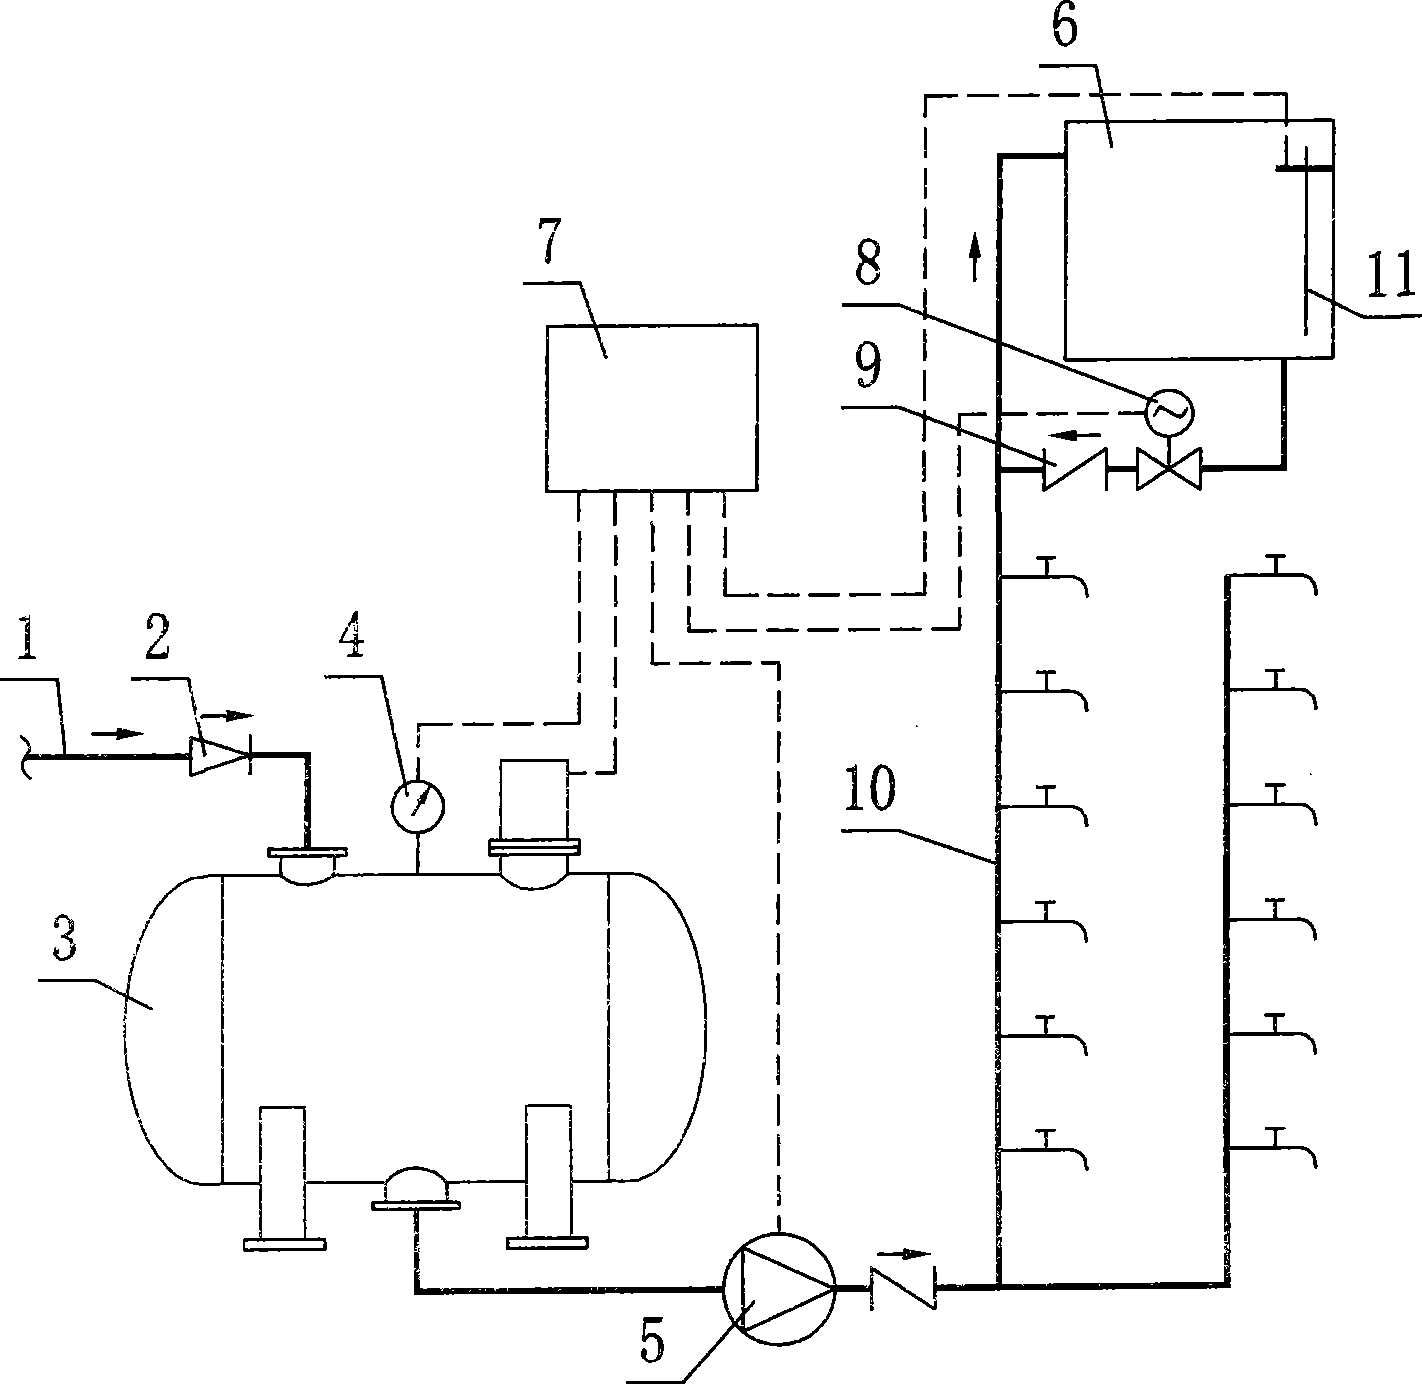 Non negative-pressure water supply system of high position water-storing tank